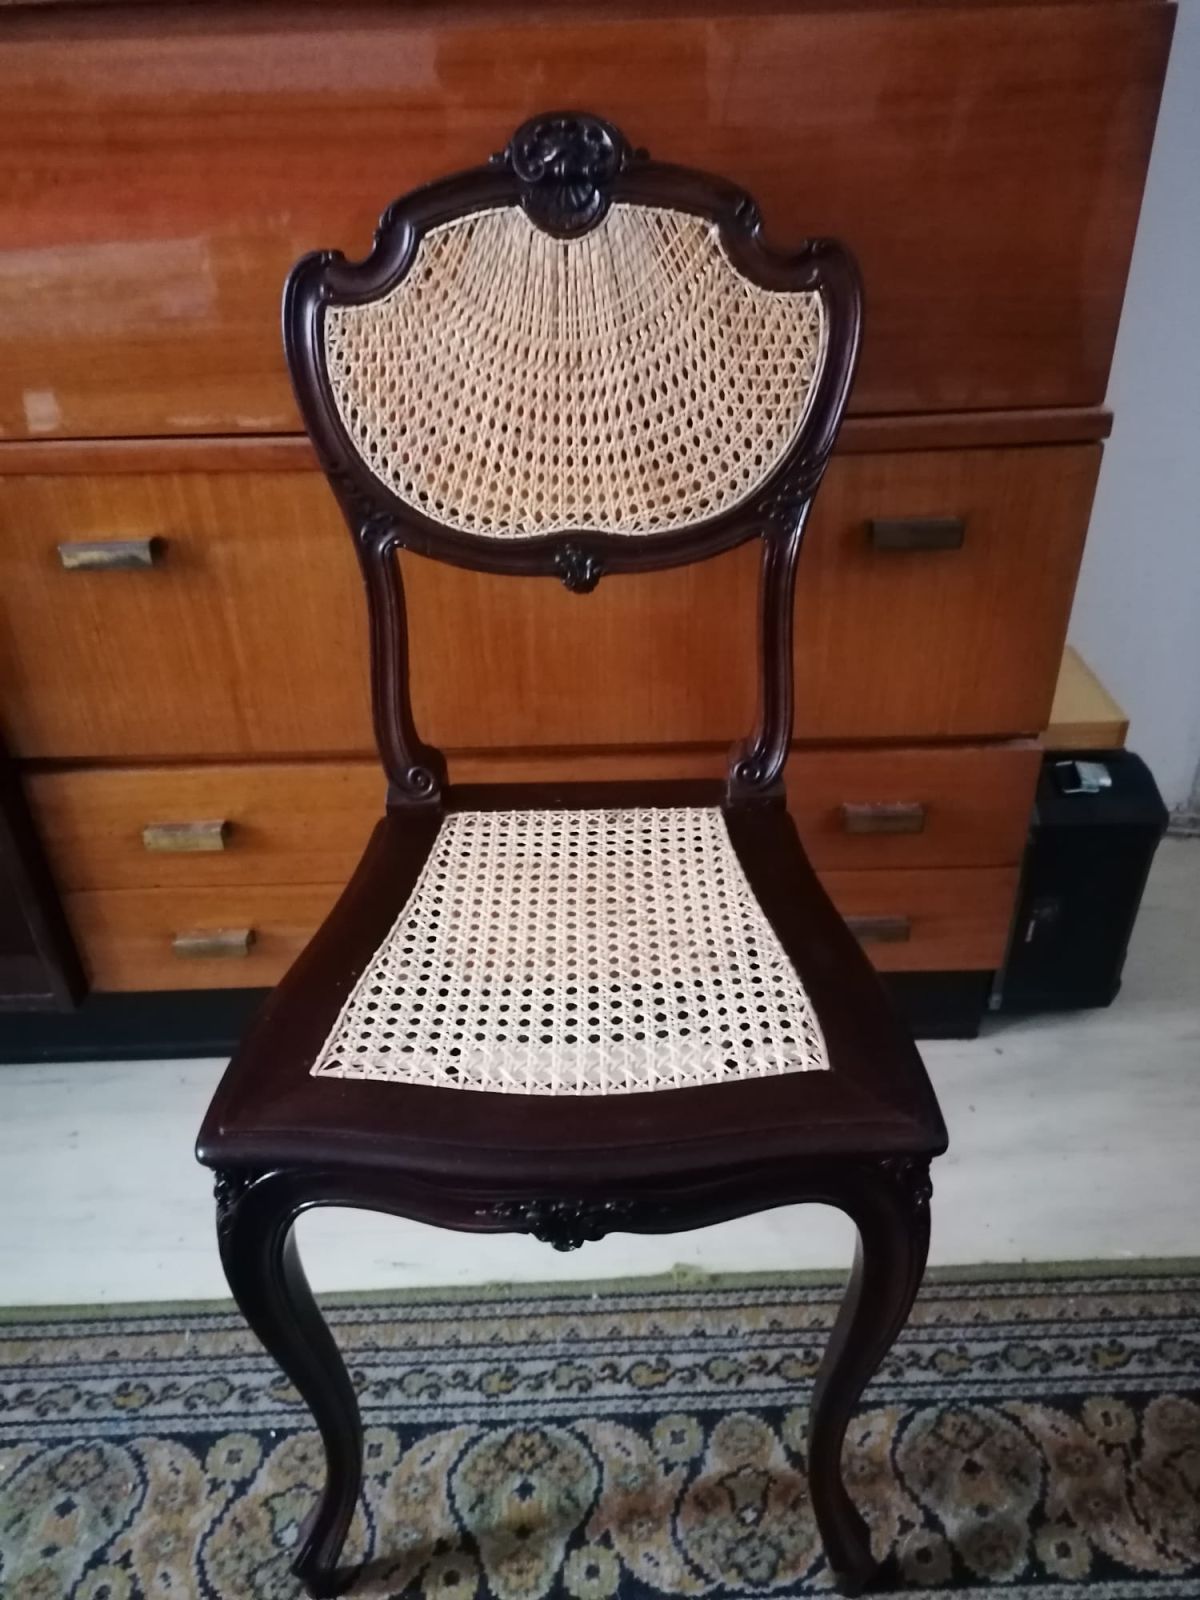 Old furniture gets a new lease of life. For restoration and refurbishment, buy quality cane webbing for chair repair from our webshop.